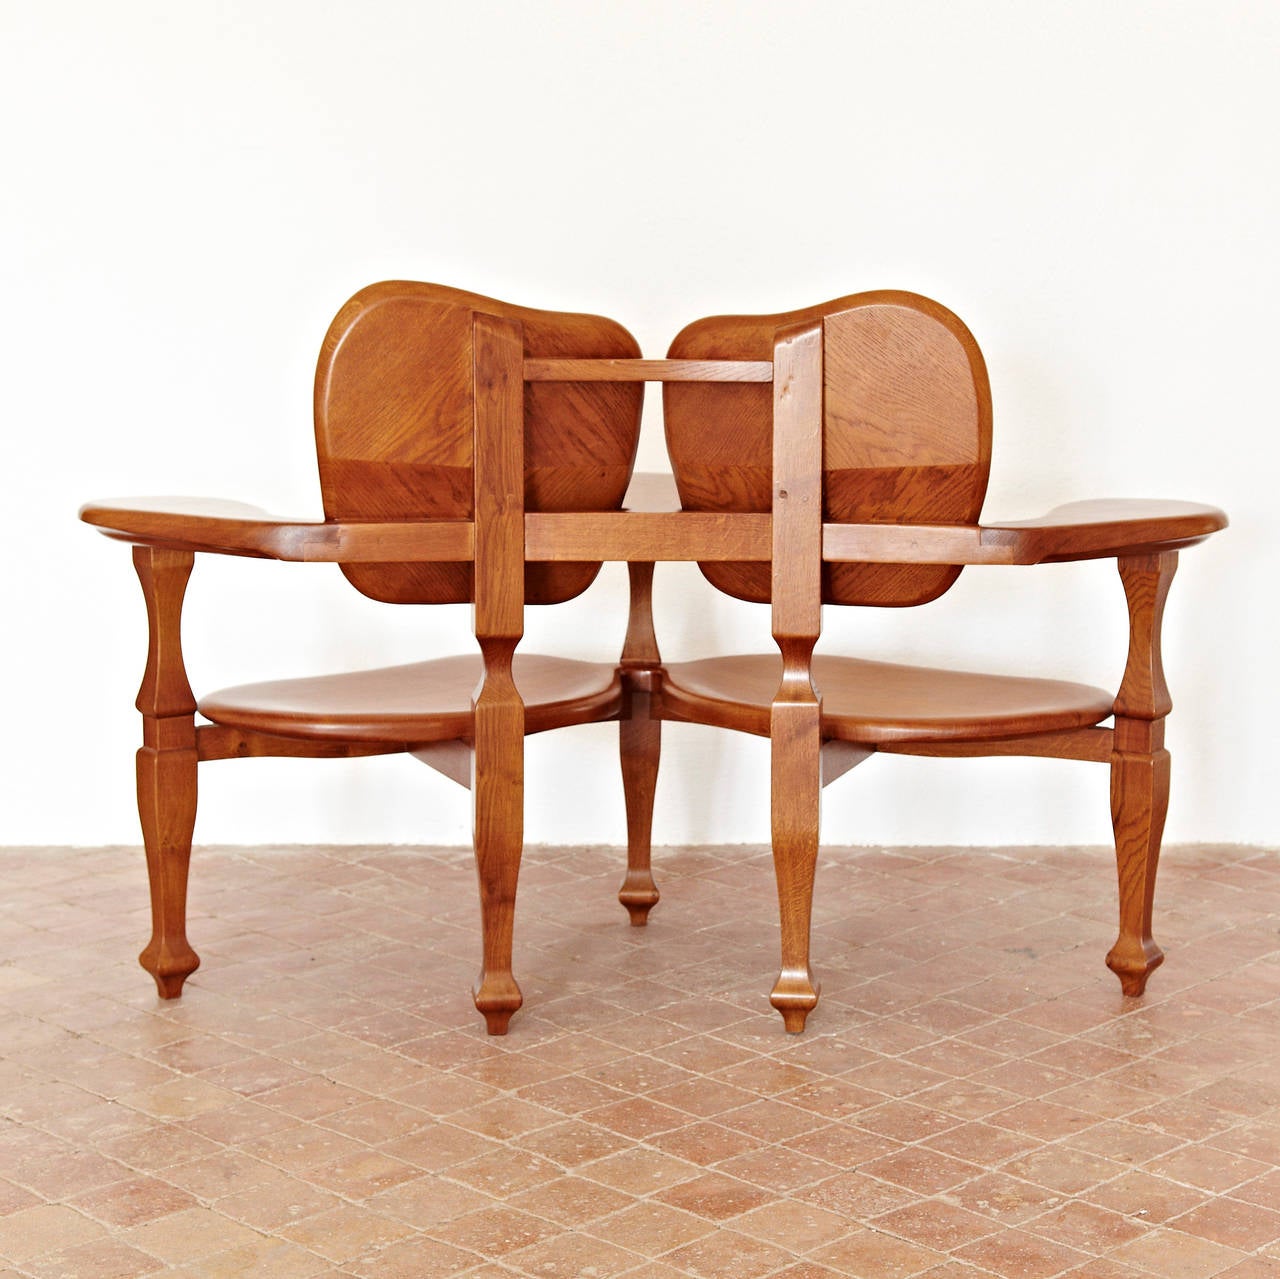 Bench for Casa Batllo, designed after a model by Antoni Gaudi. 
Manufactured in Barcelona by BD.
Sculpted solid varnished oak.
The model by Gaudii´ was designed early 20th century; this model was produced, circa 2000

In good original